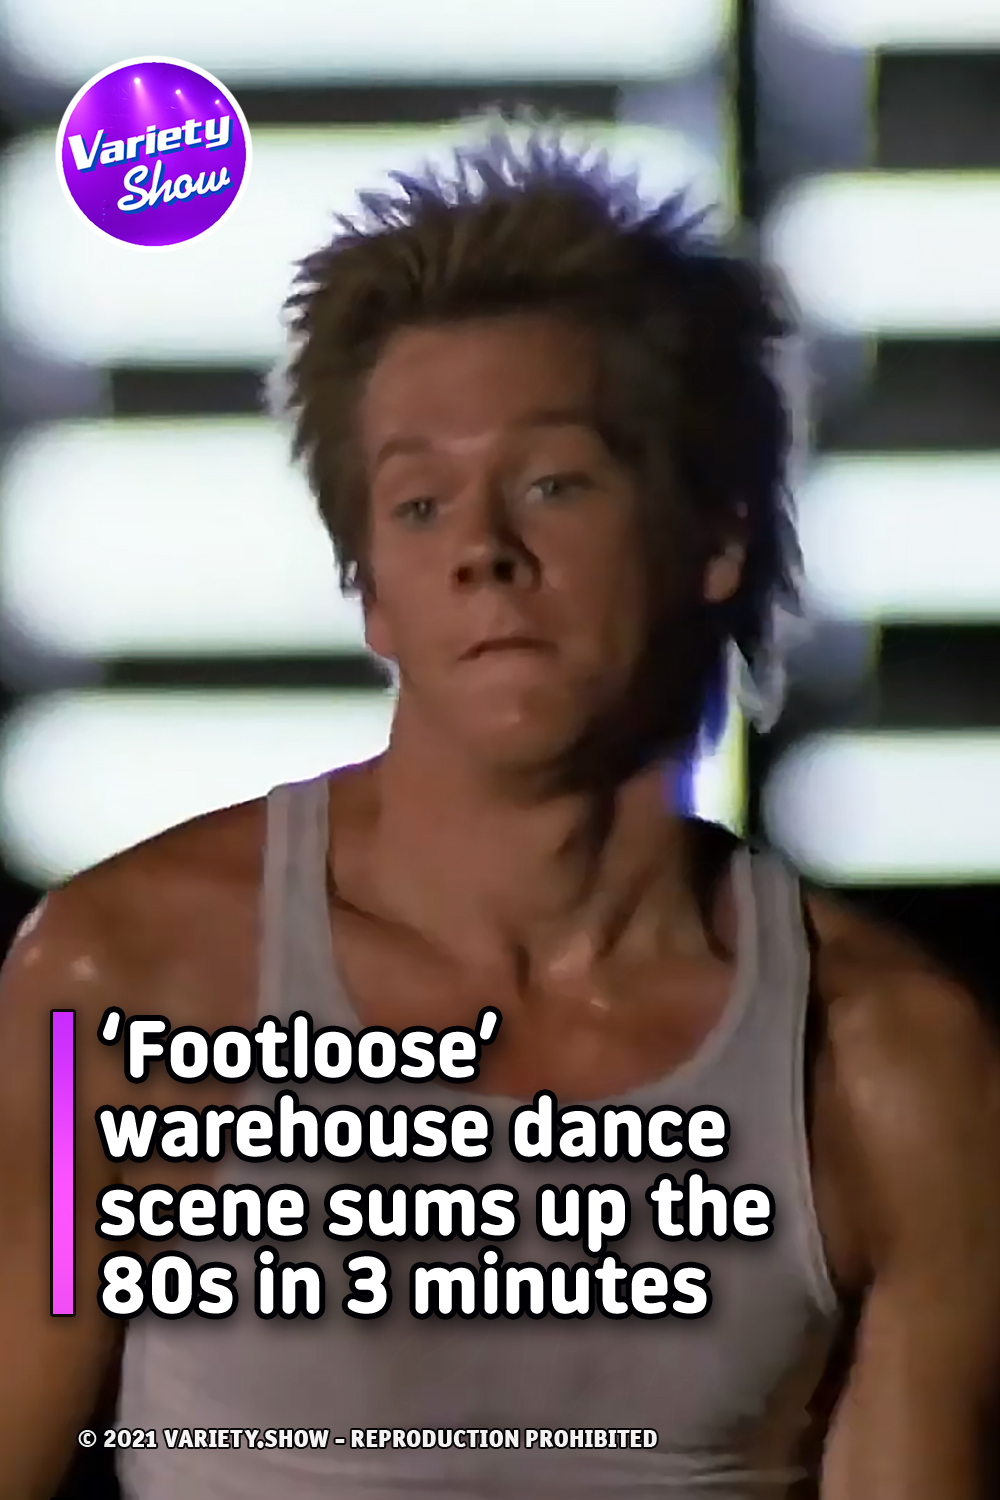 ‘Footloose’ warehouse dance scene sums up the 80s in 3 minutes